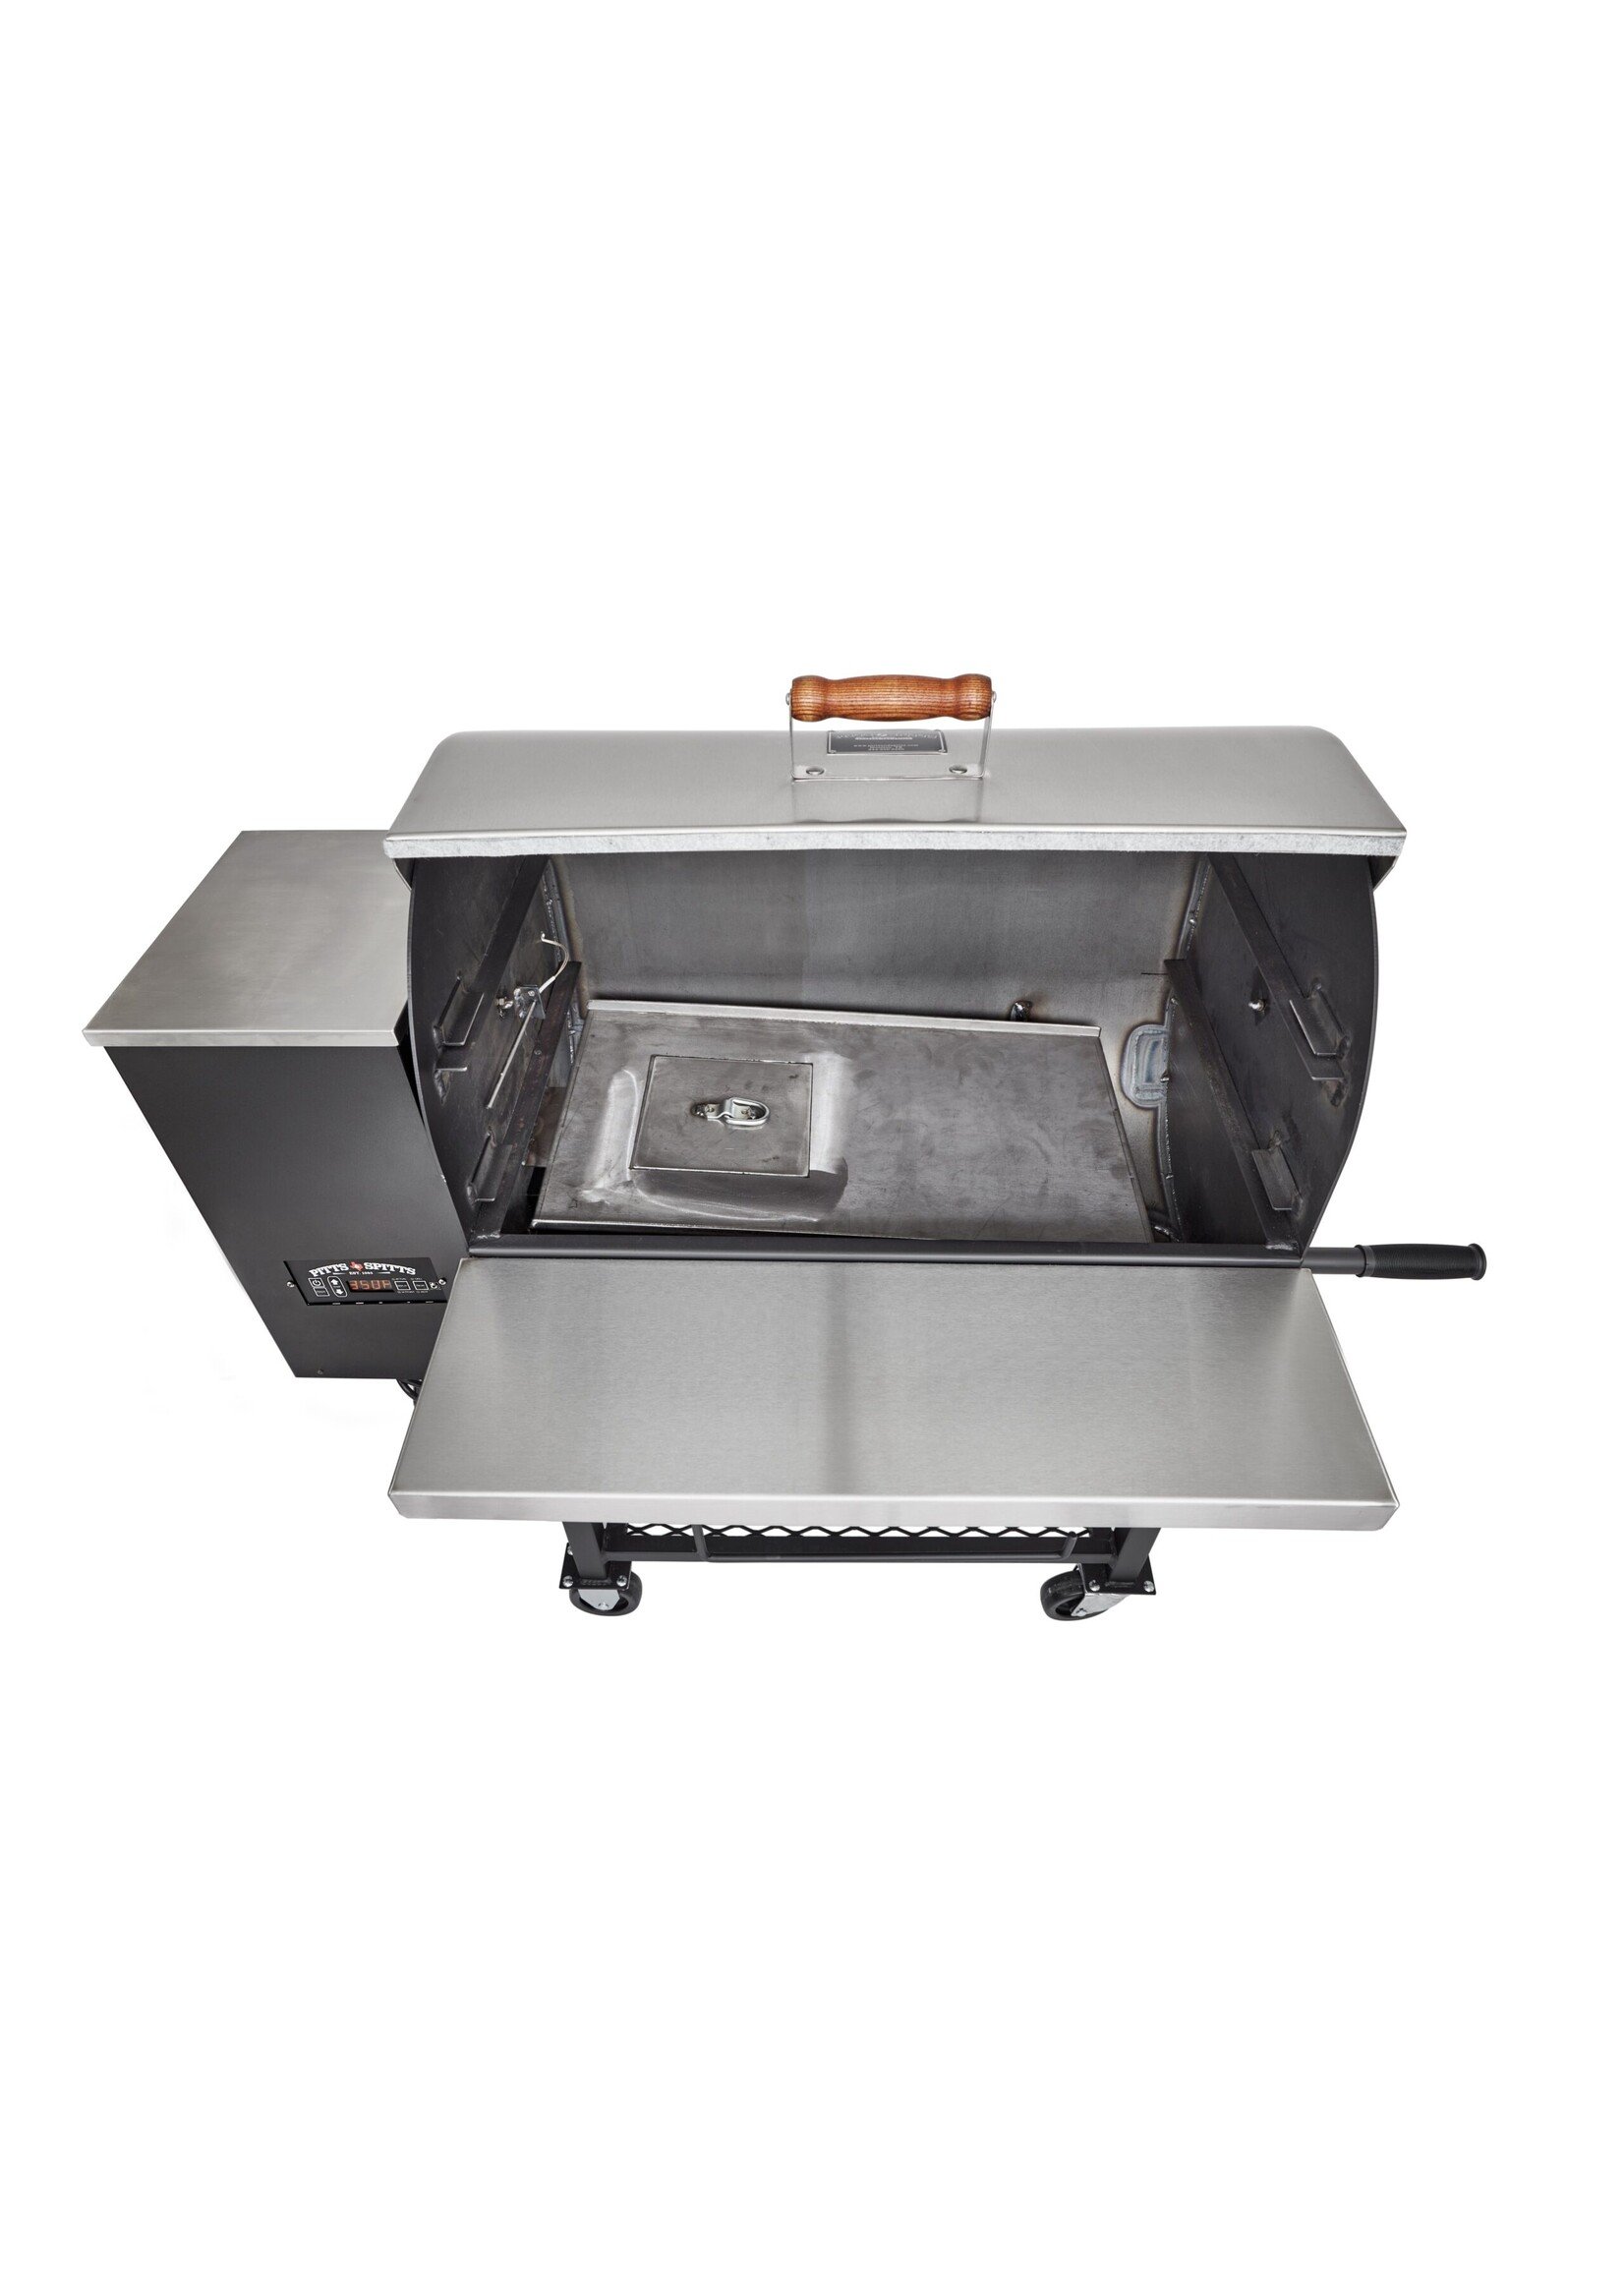 Pitts & Spitts Pitts & Spitts Maverick 850 Pellet Grill w/ 8" Casters